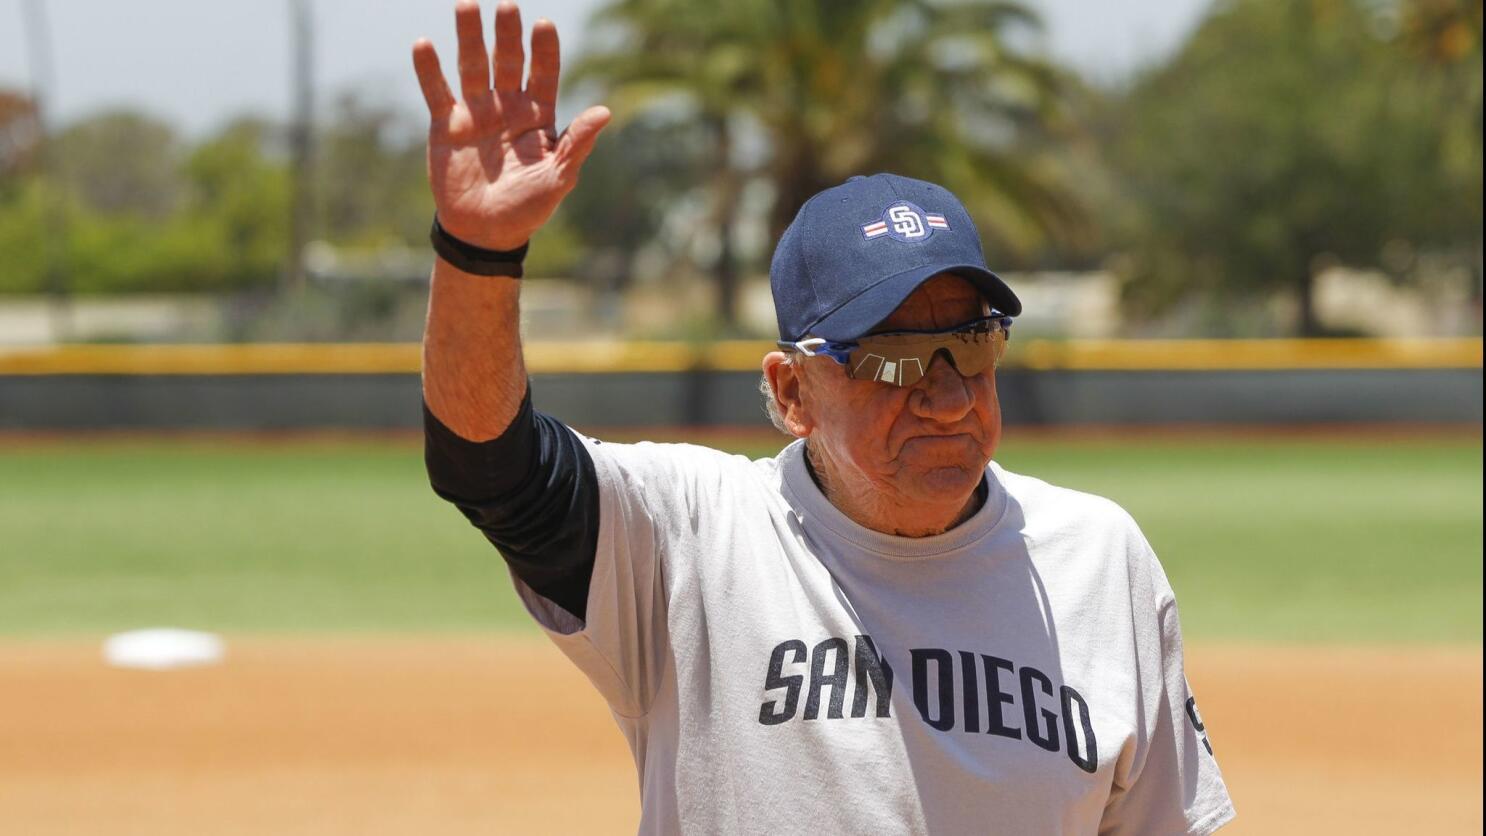 Padres to hold fantasy camp - The San Diego Union-Tribune